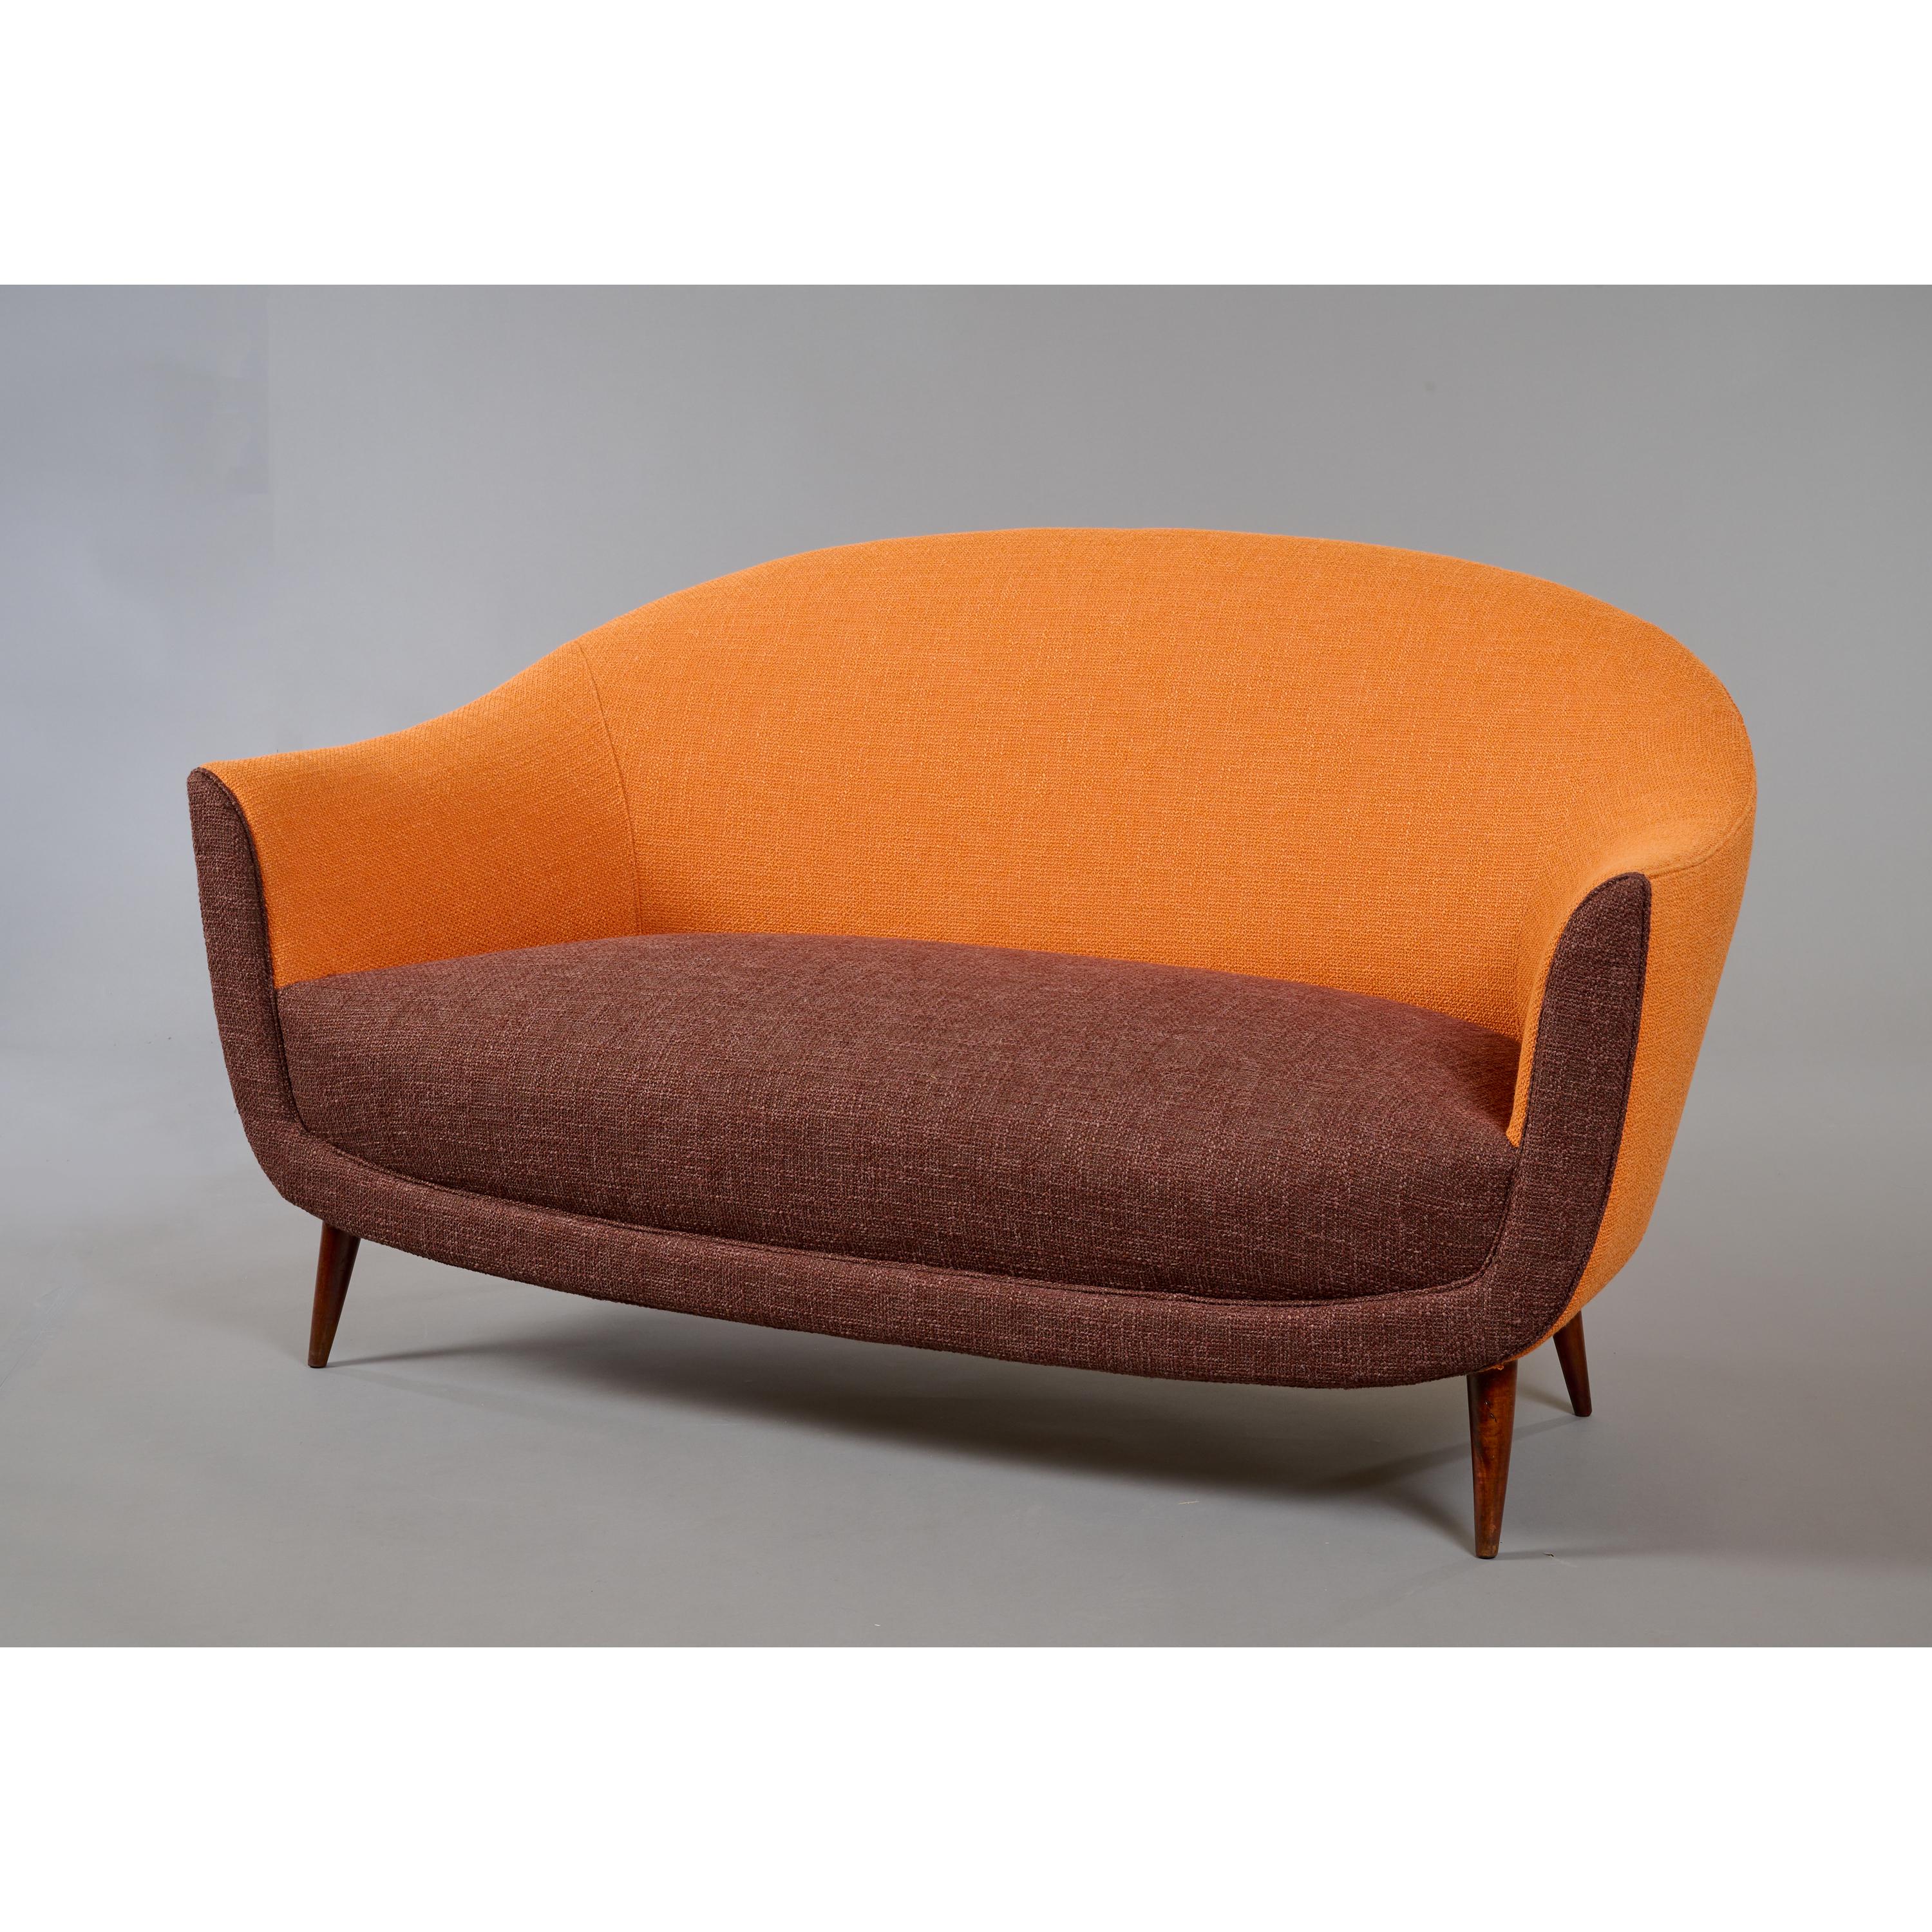 Italian Curved ITSO Federico Munari Settee in Wood with Orange Upholstery, Italy 1950s  For Sale